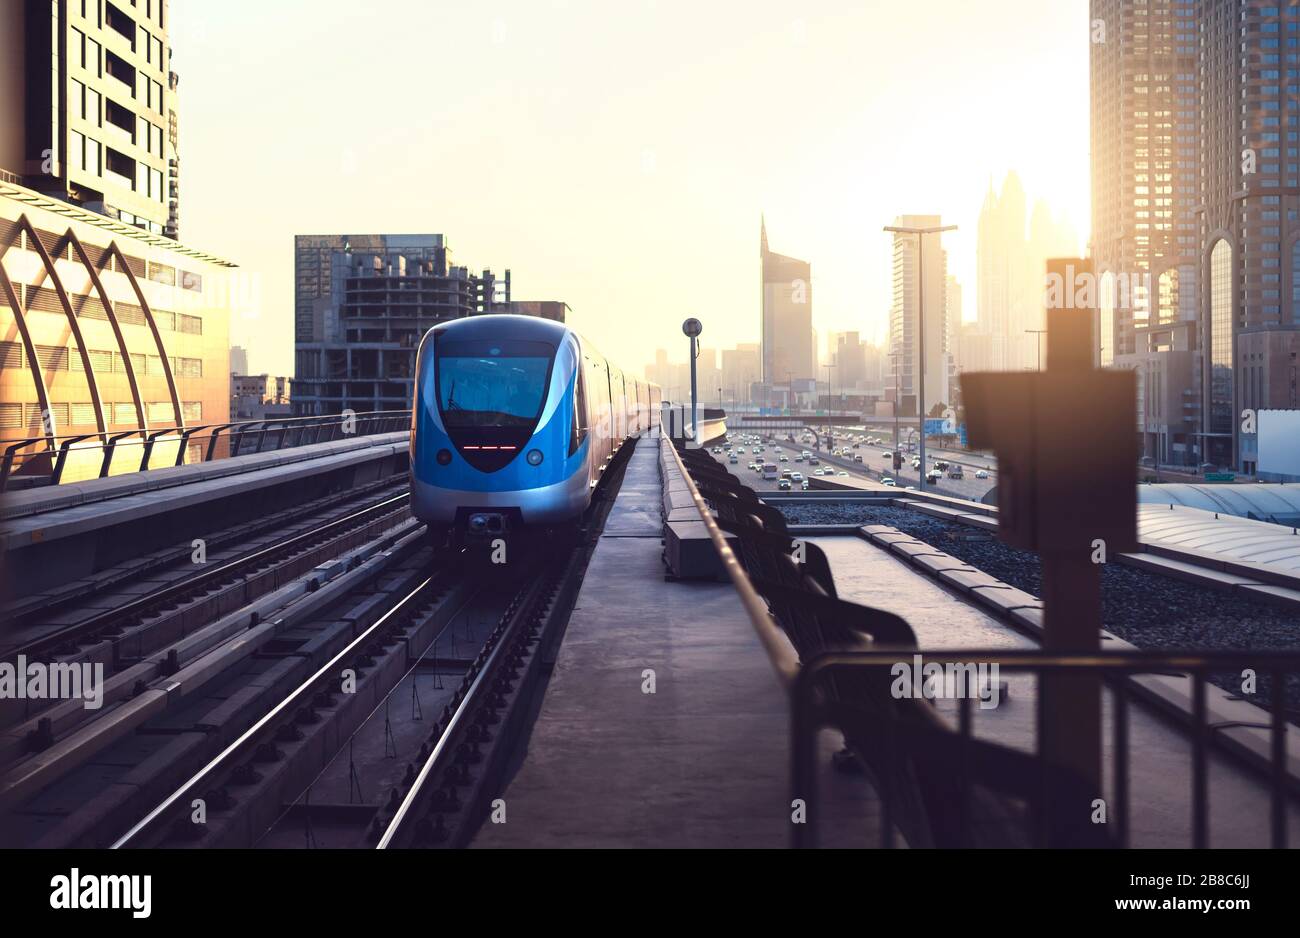 Subway train at sunset in modern city. Dubai metro. Downtown skyline with sundown. Skyscraper buildings and car traffic in the highway. Stock Photo